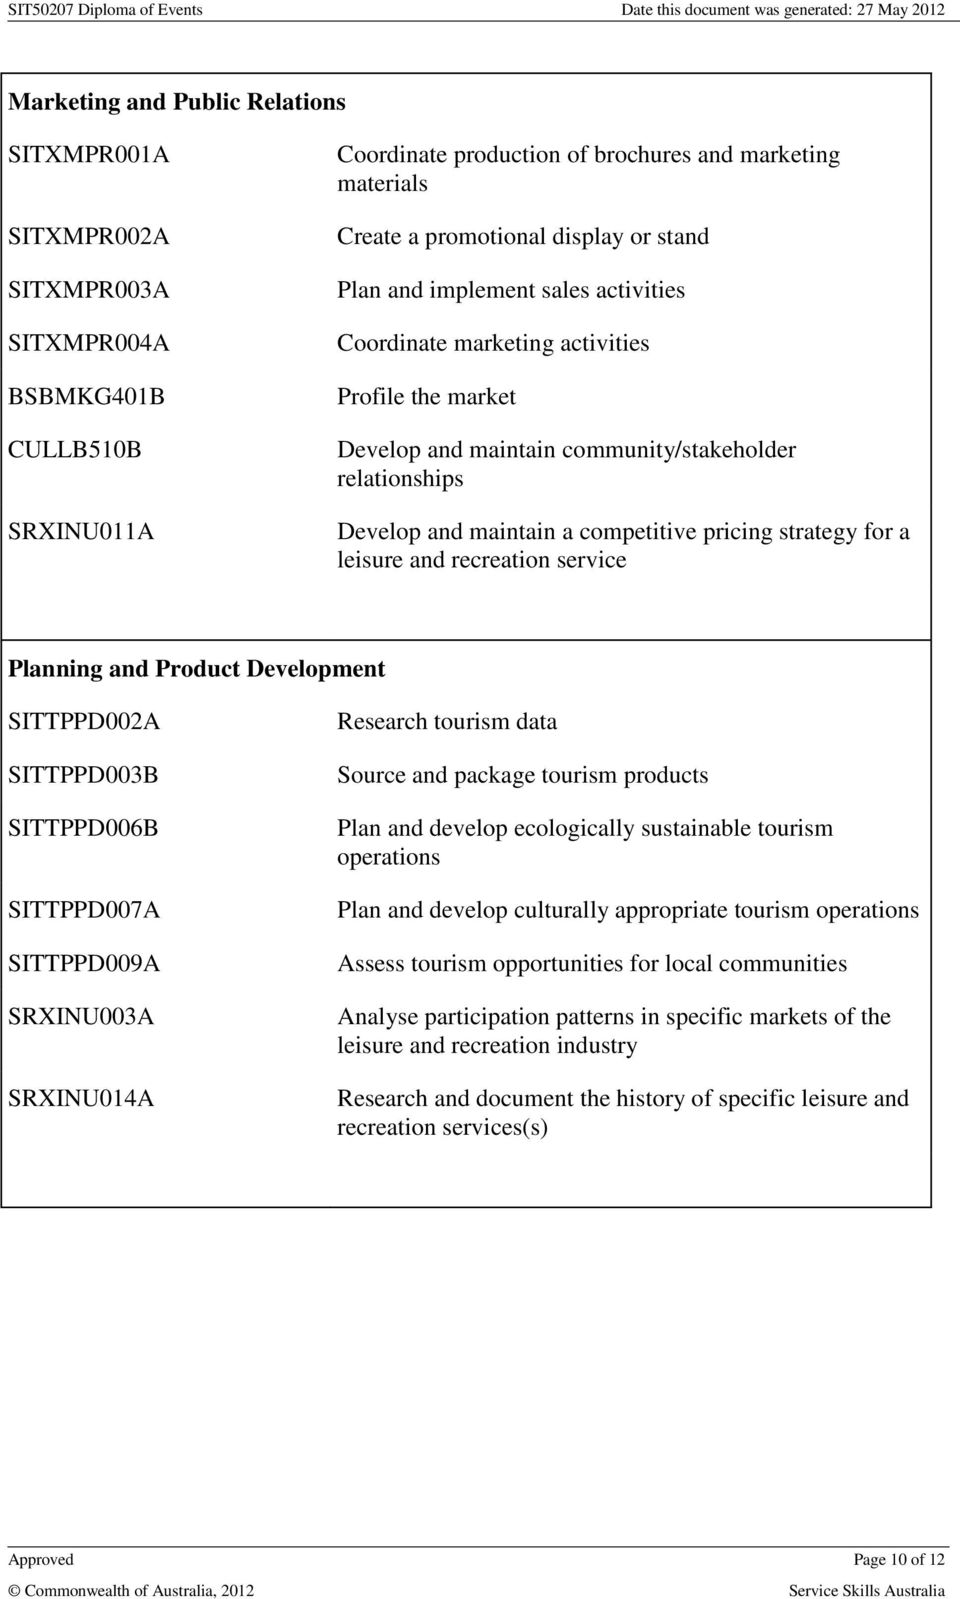 strategy for a leisure and recreation service Planning and Product Development SITTPPD002A SITTPPD003B SITTPPD006B SITTPPD007A SITTPPD009A SRXINU003A SRXINU014A Research tourism data Source and